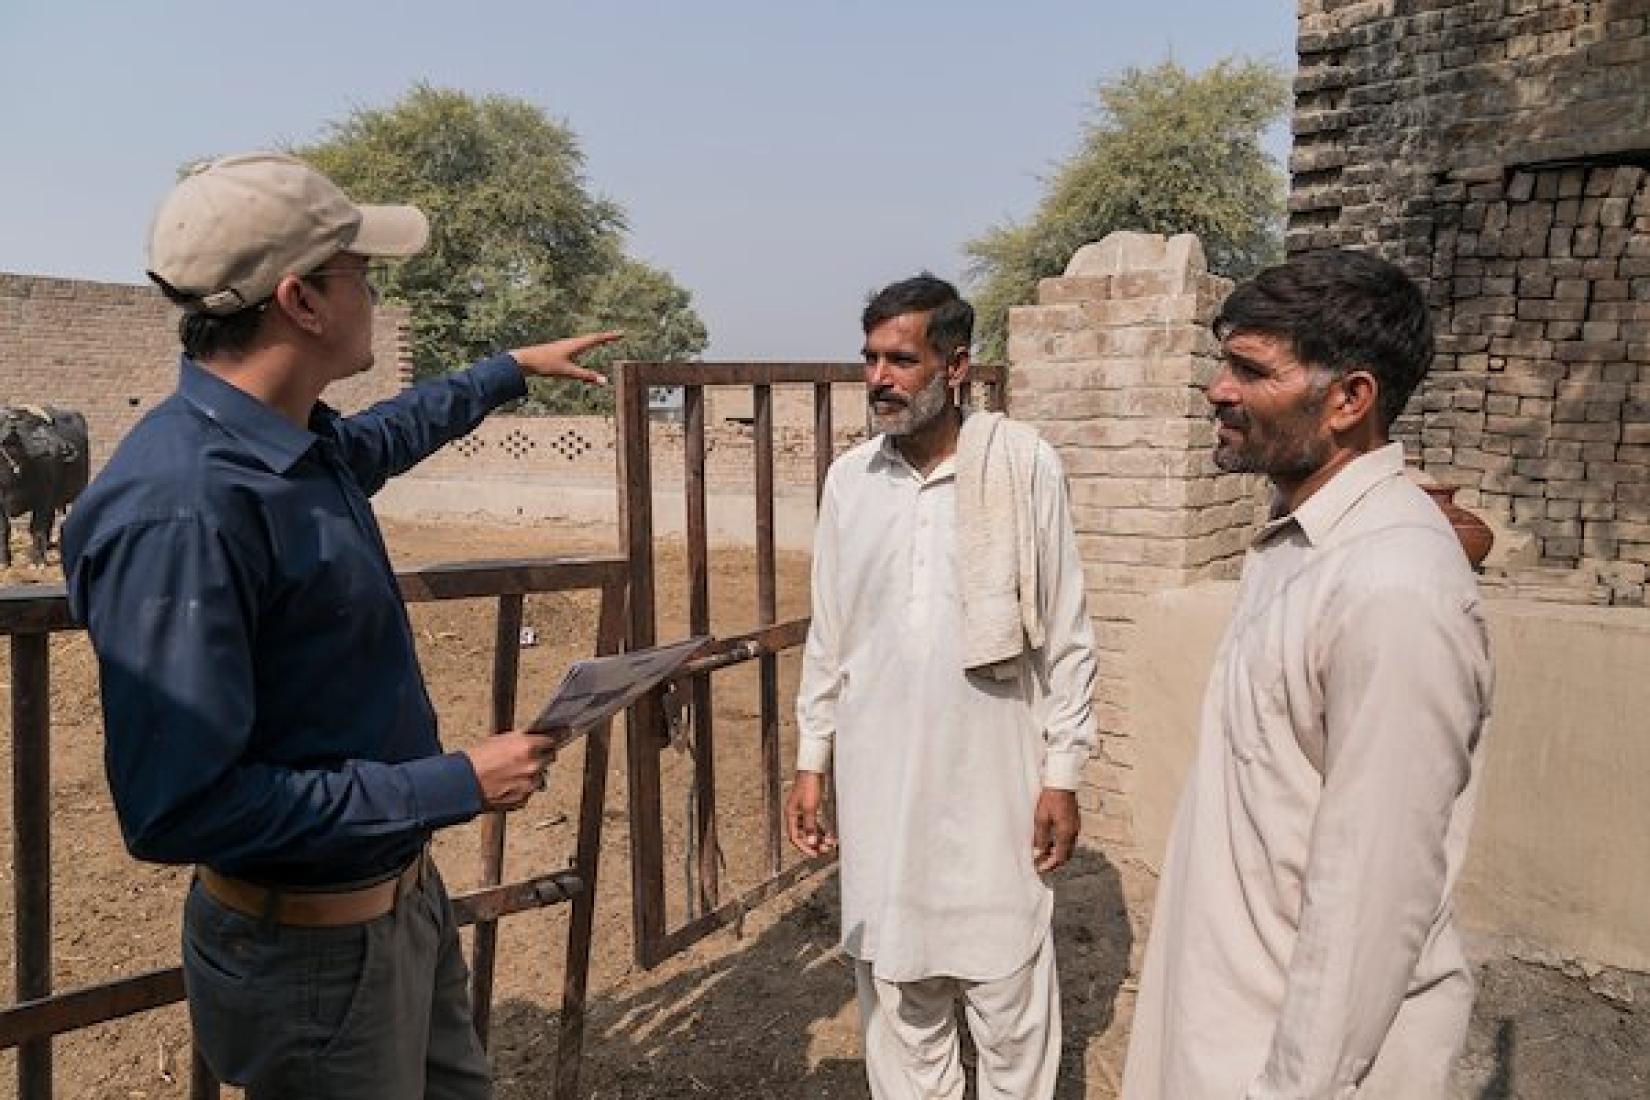 Khizer Hayat Punjab Province area adviser for the ASLP project talks to Allahdad (Centre) and his brother, both lead farmers from 96D village in rural Punjab Province. Image: ACIAR/Conor Ashleigh